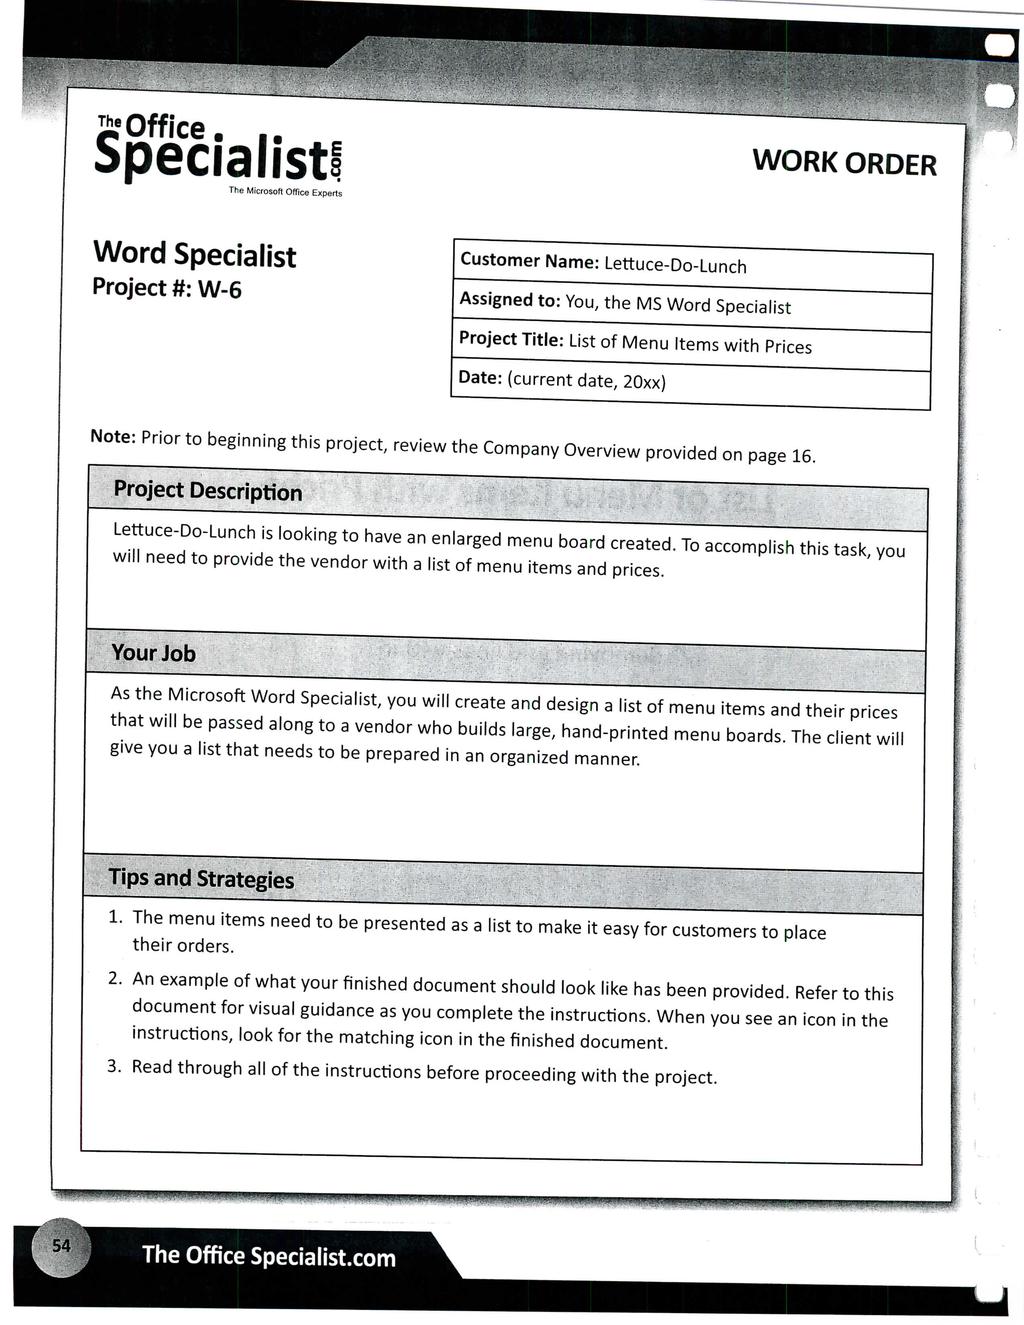 TheOffice Specialist The Microsoft Office Experts Word Specialist Project #: W-6 Customer Name: Lettuce-Do-Lunch Assigned to: You, the MS Word Specialist WORK ORDER Project Title: List of Menu Items